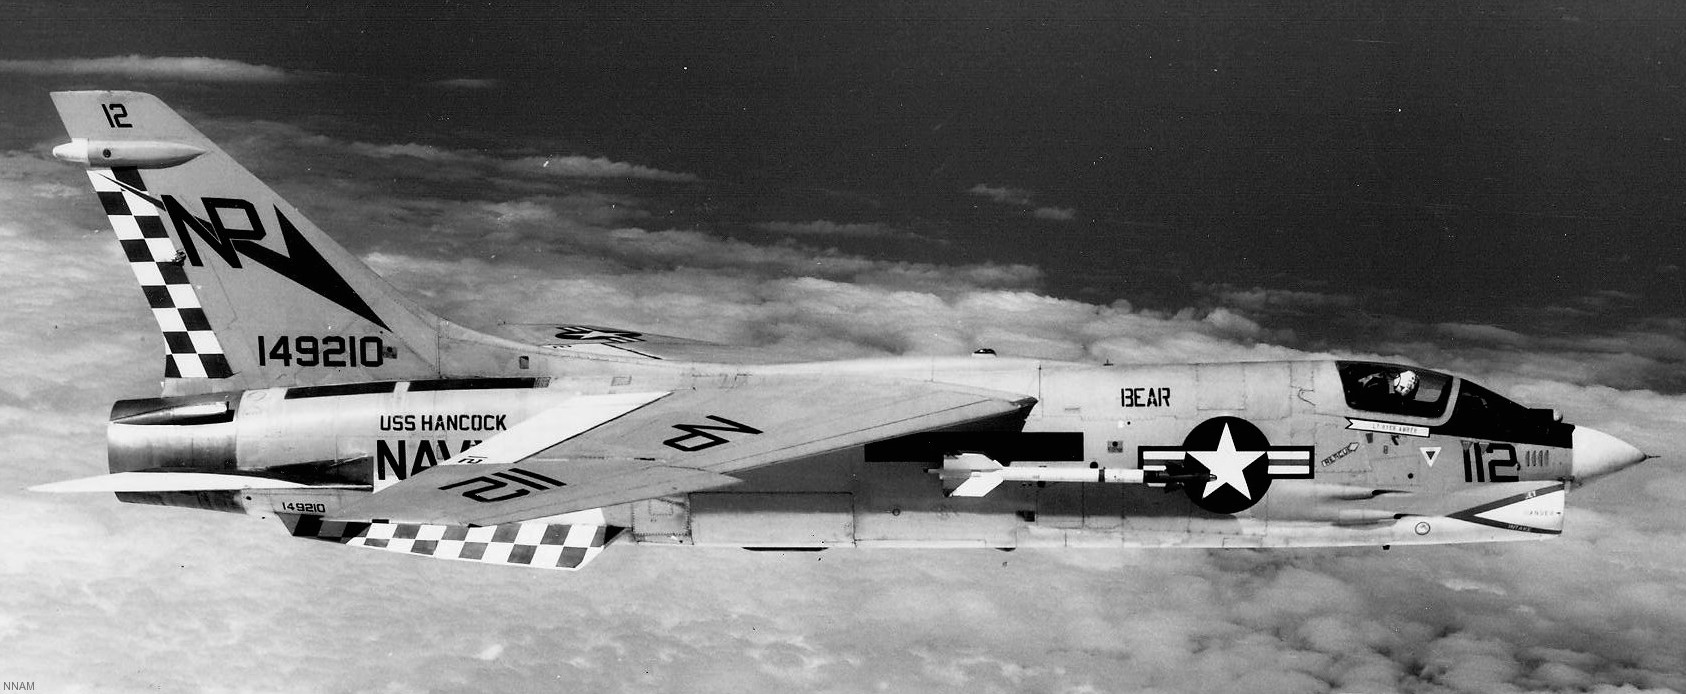 vf-211 fighting checkmates fighter squadron f-8j crusader us navy carrier air wing cvw-21 uss hancock cva-19 25